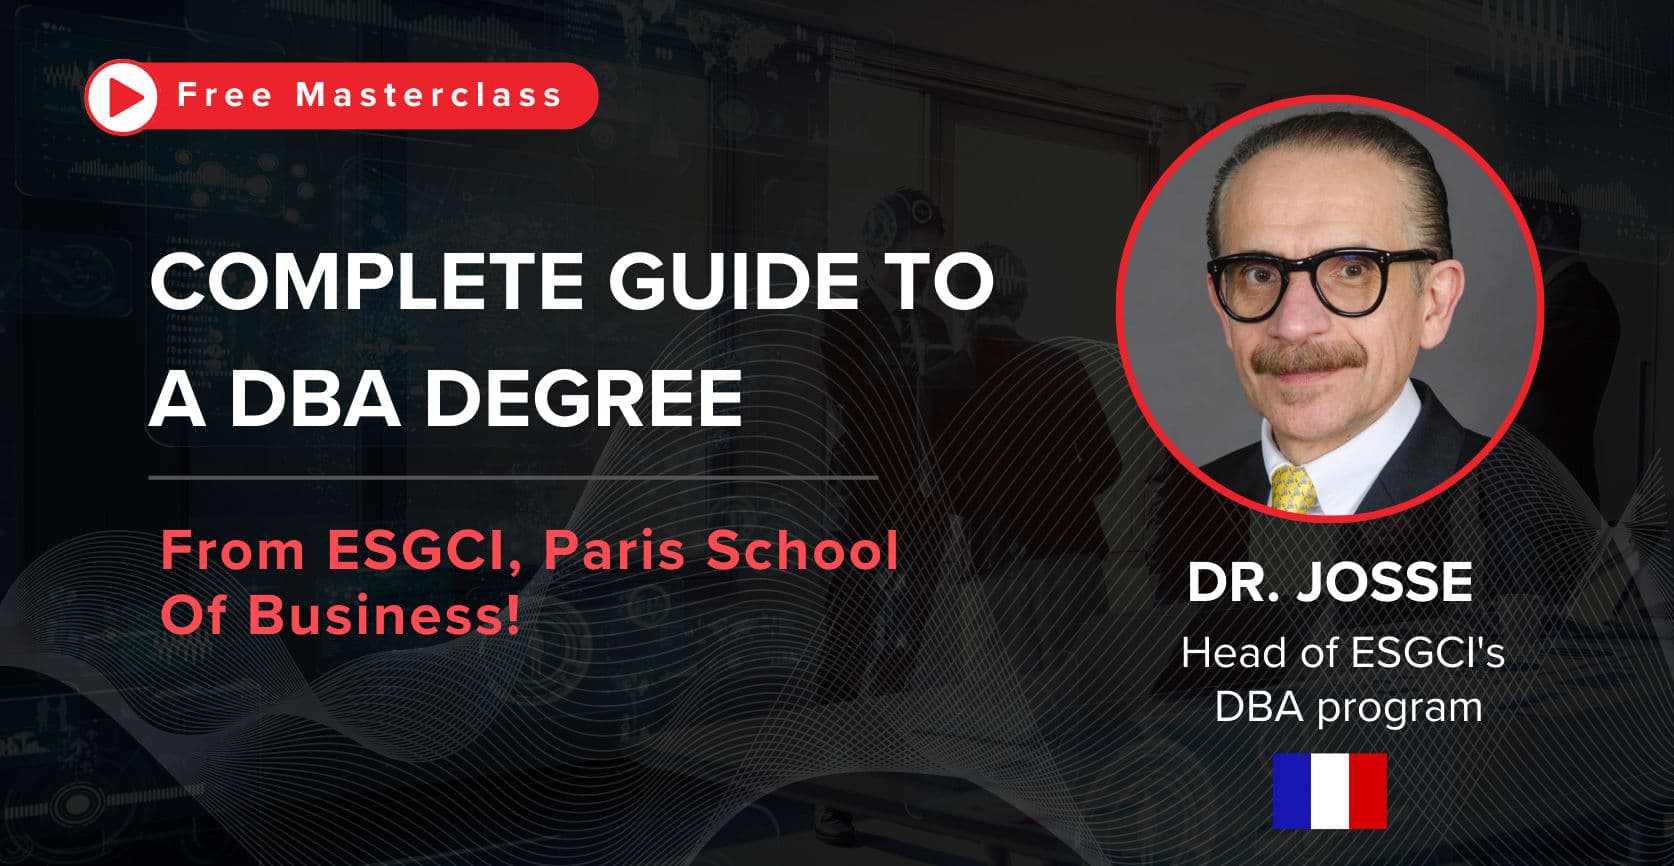 Complete Guide to a DBA Degree from ESGCI, Paris School of Business!